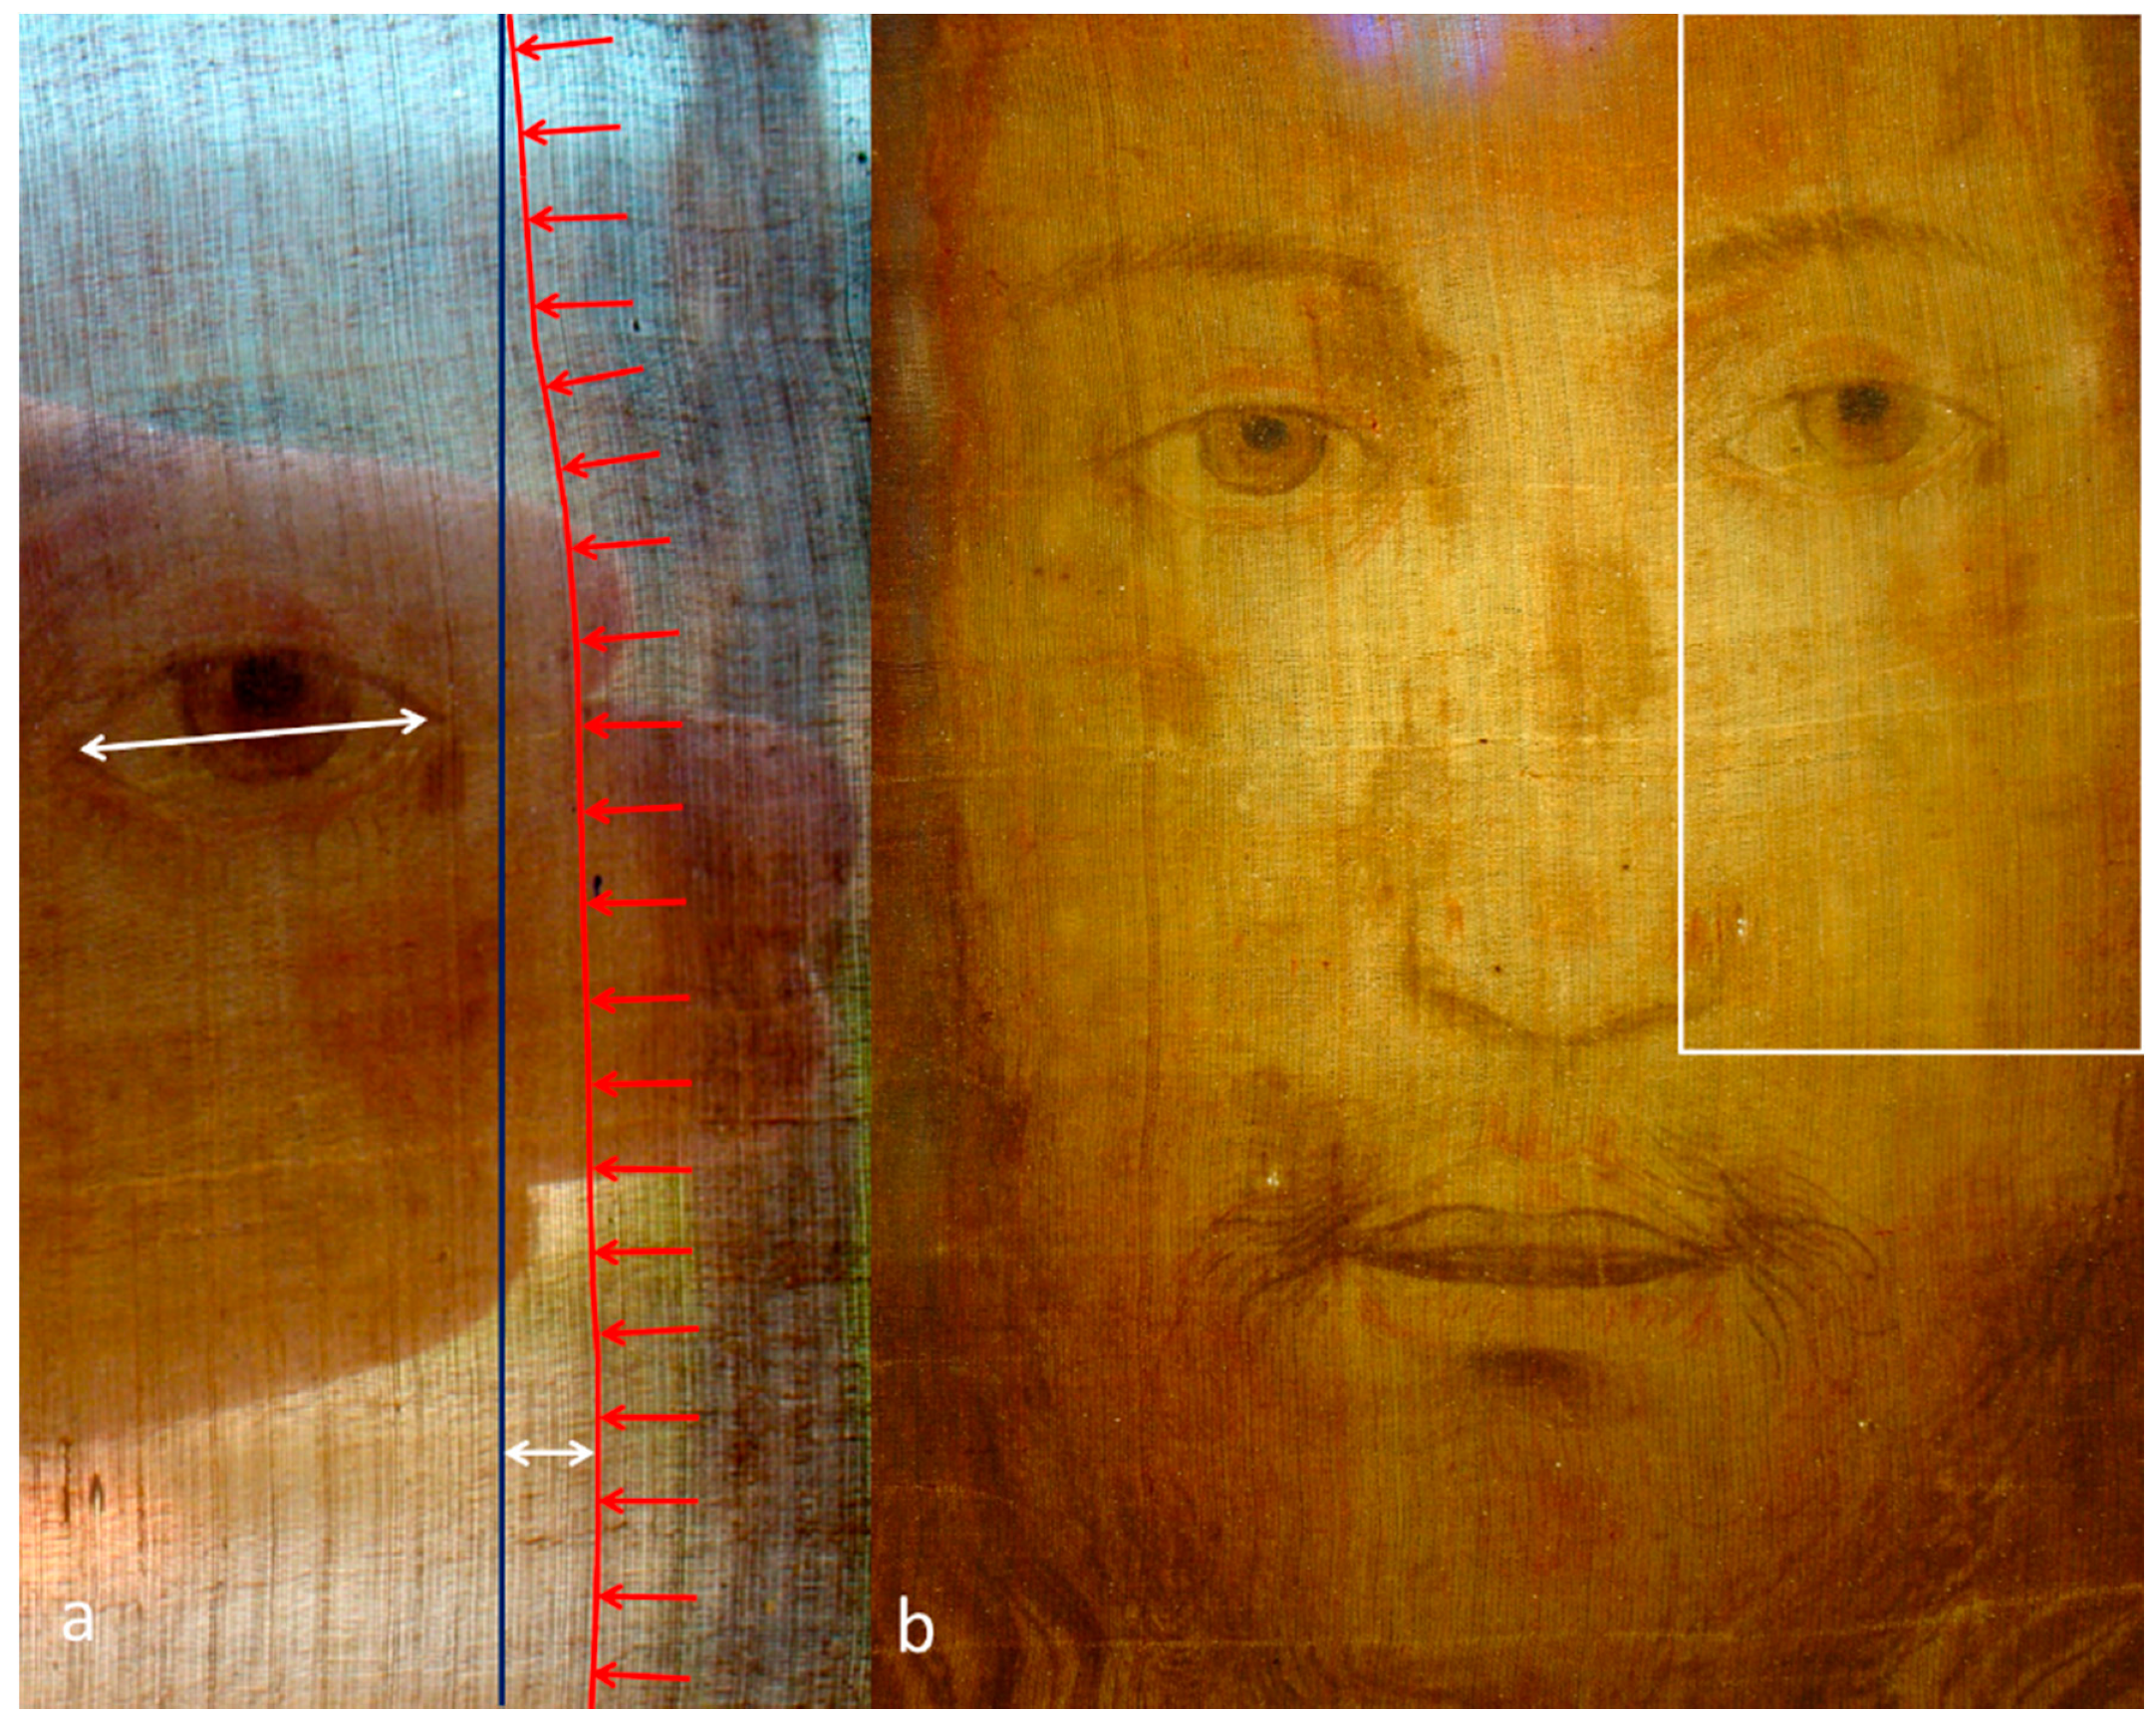 Heritage | Free Full-Text | Imaging Analysis and Digital Restoration of the  Holy Face of Manoppello—Part I | HTML